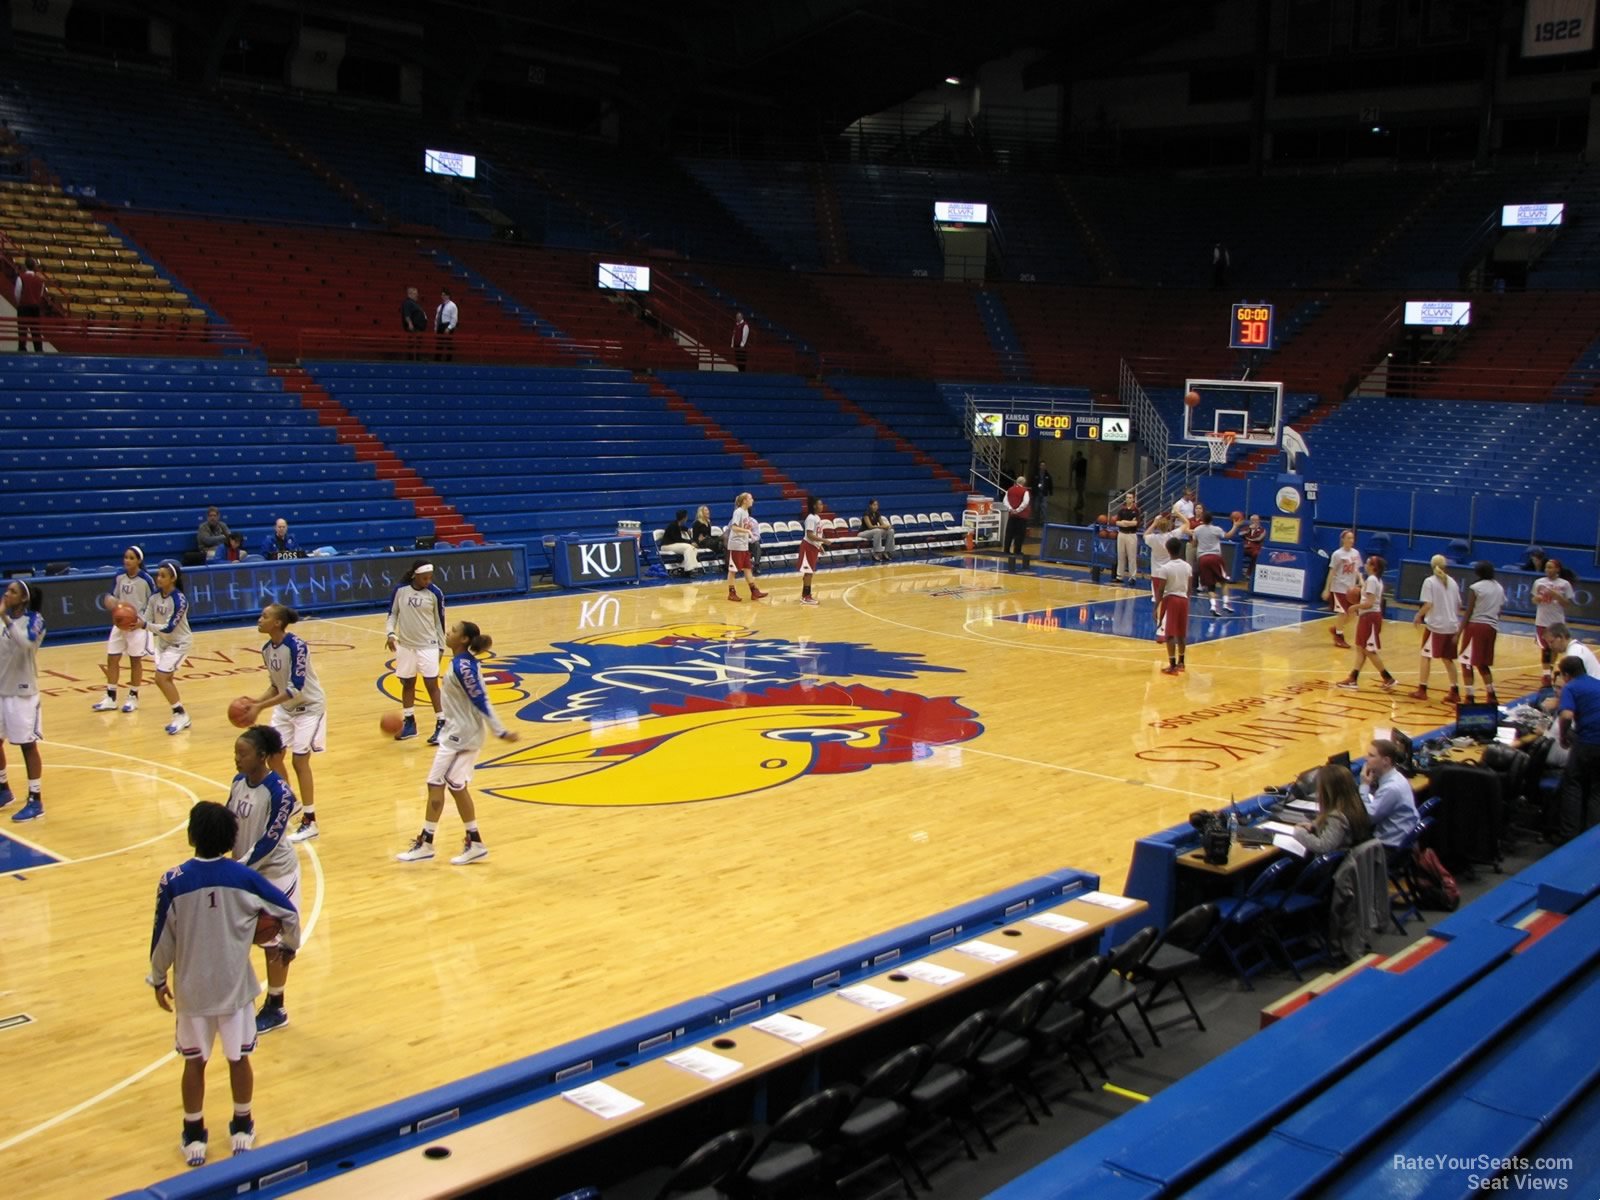 section h, row 7 seat view  - allen fieldhouse